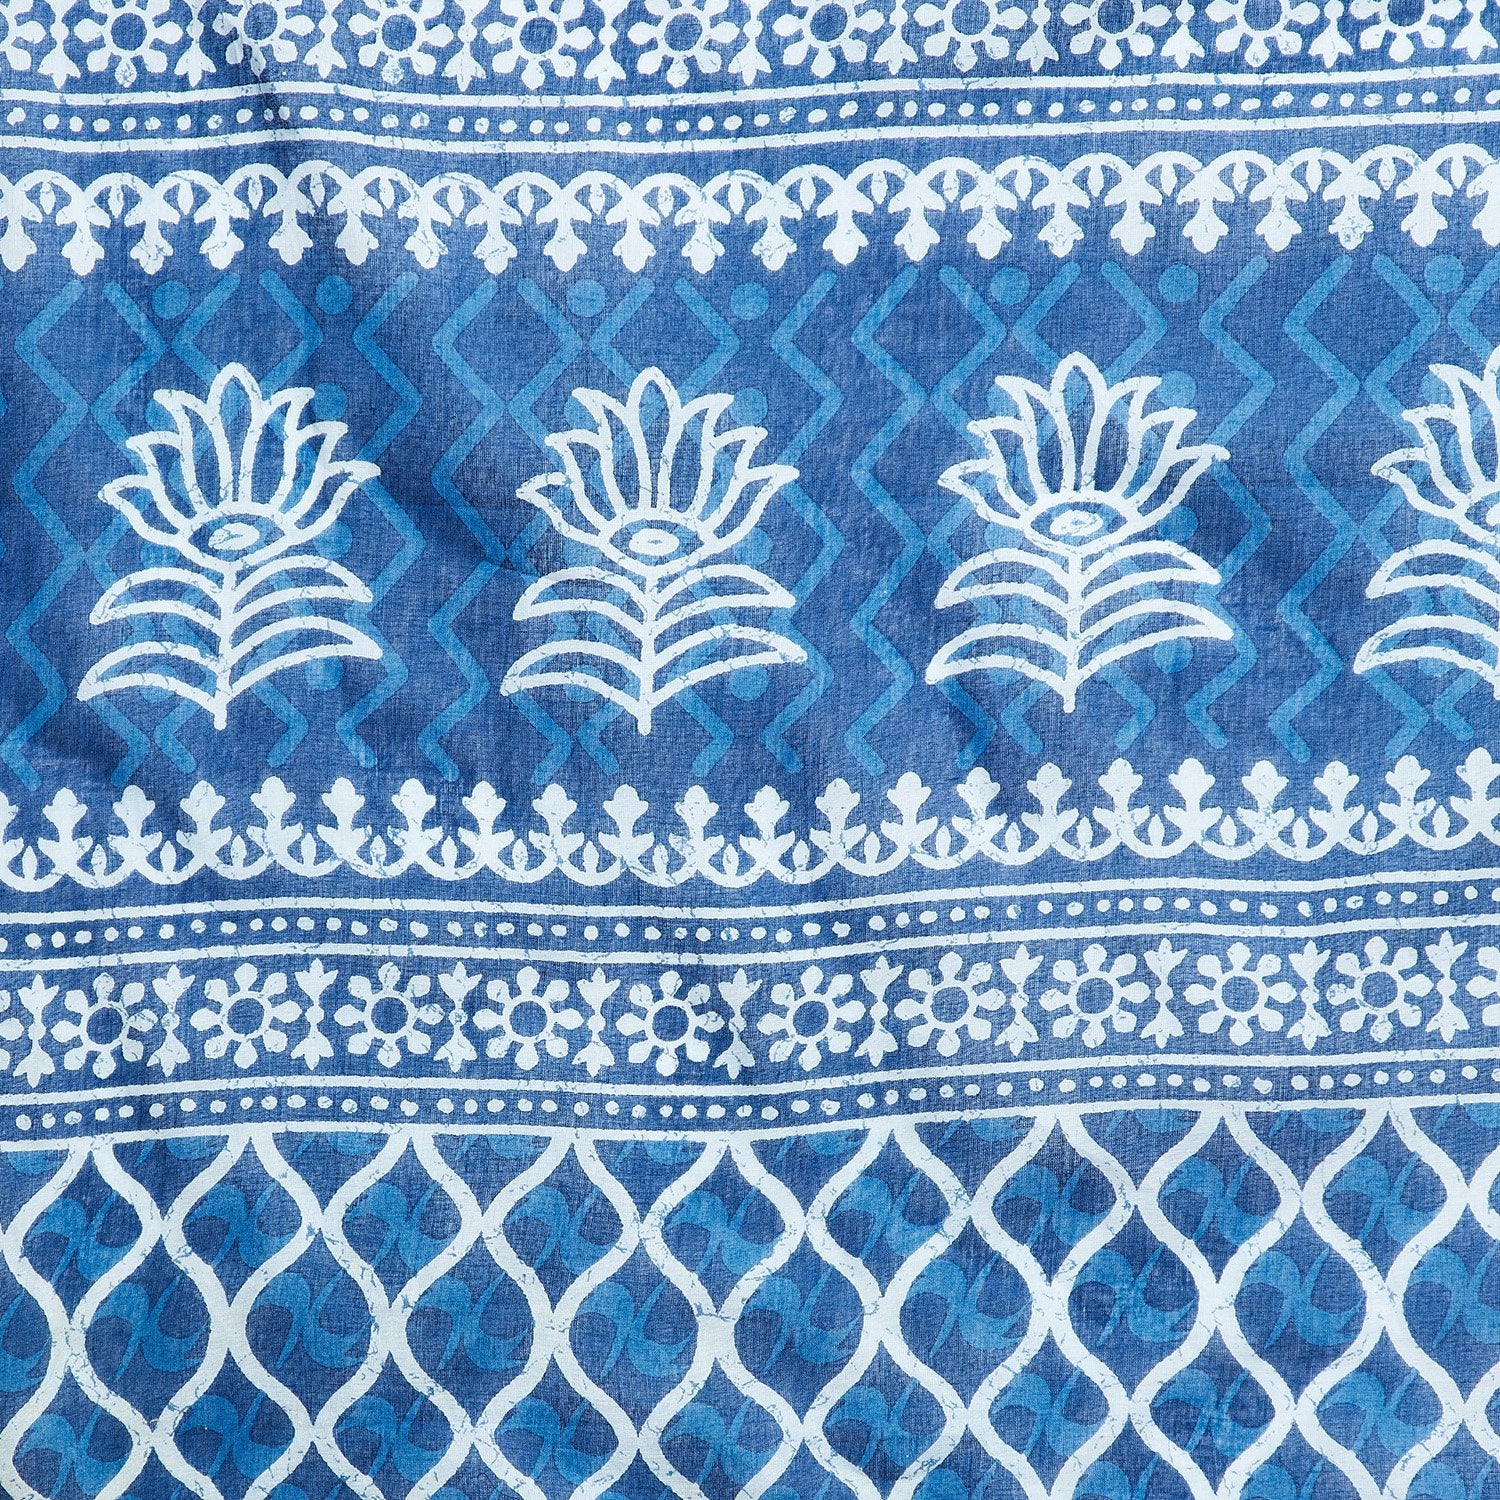 Blue Indigo Screen Print Handcrafted Cotton Saree-Saree-Kalakari India-RDSNSA0108-Cotton, Geographical Indication, Hand Blocks, Hand Crafted, Heritage Prints, Indigo, Sarees, Screen Print, Sustainable Fabrics-[Linen,Ethnic,wear,Fashionista,Handloom,Handicraft,Indigo,blockprint,block,print,Cotton,Chanderi,Blue, latest,classy,party,bollywood,trendy,summer,style,traditional,formal,elegant,unique,style,hand,block,print, dabu,booti,gift,present,glamorous,affordable,collectible,Sari,Saree,printed, hol